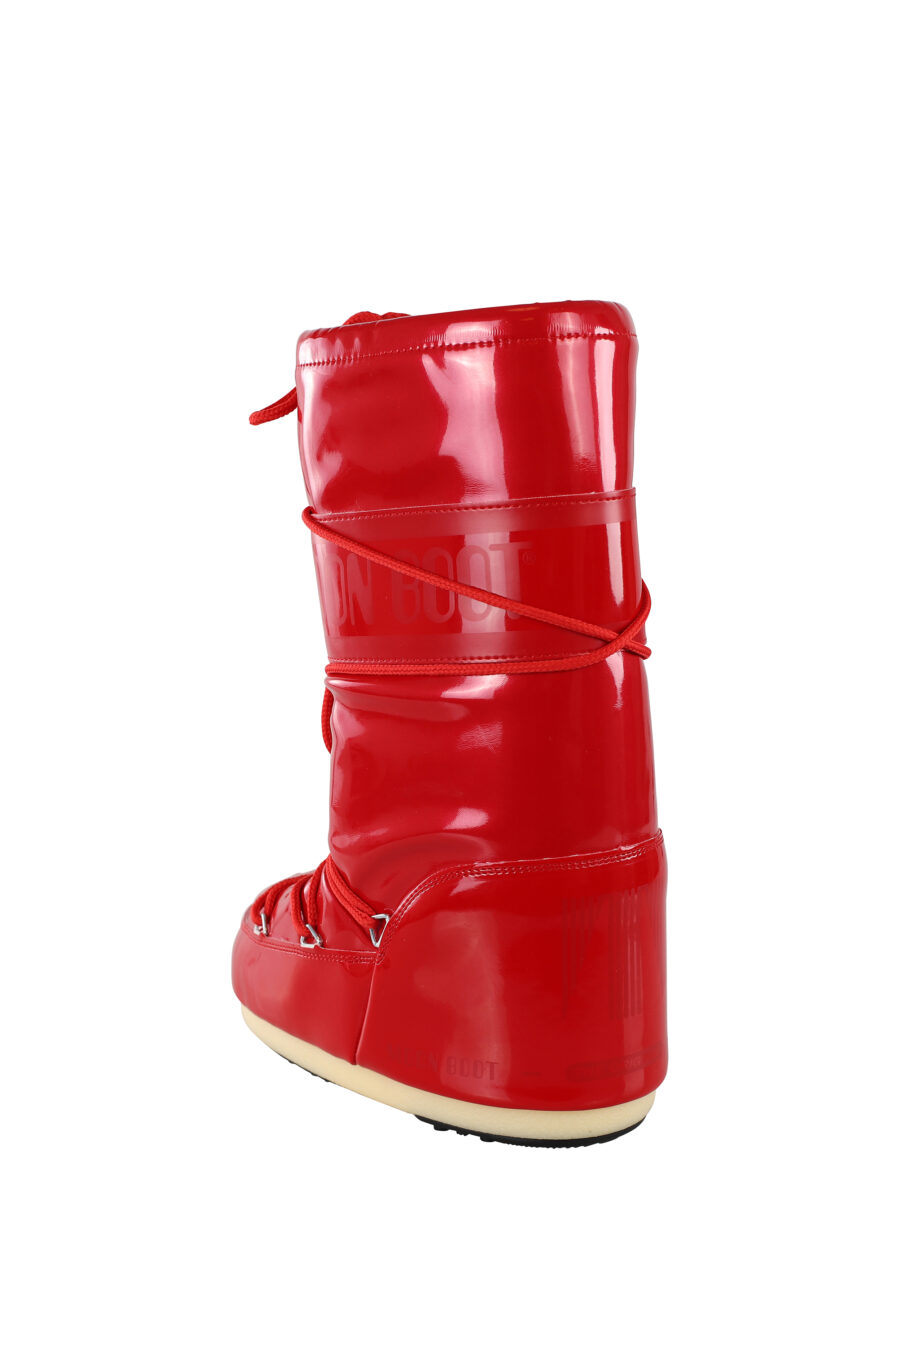 Red snow boots with monochrome logo - IMG 6750